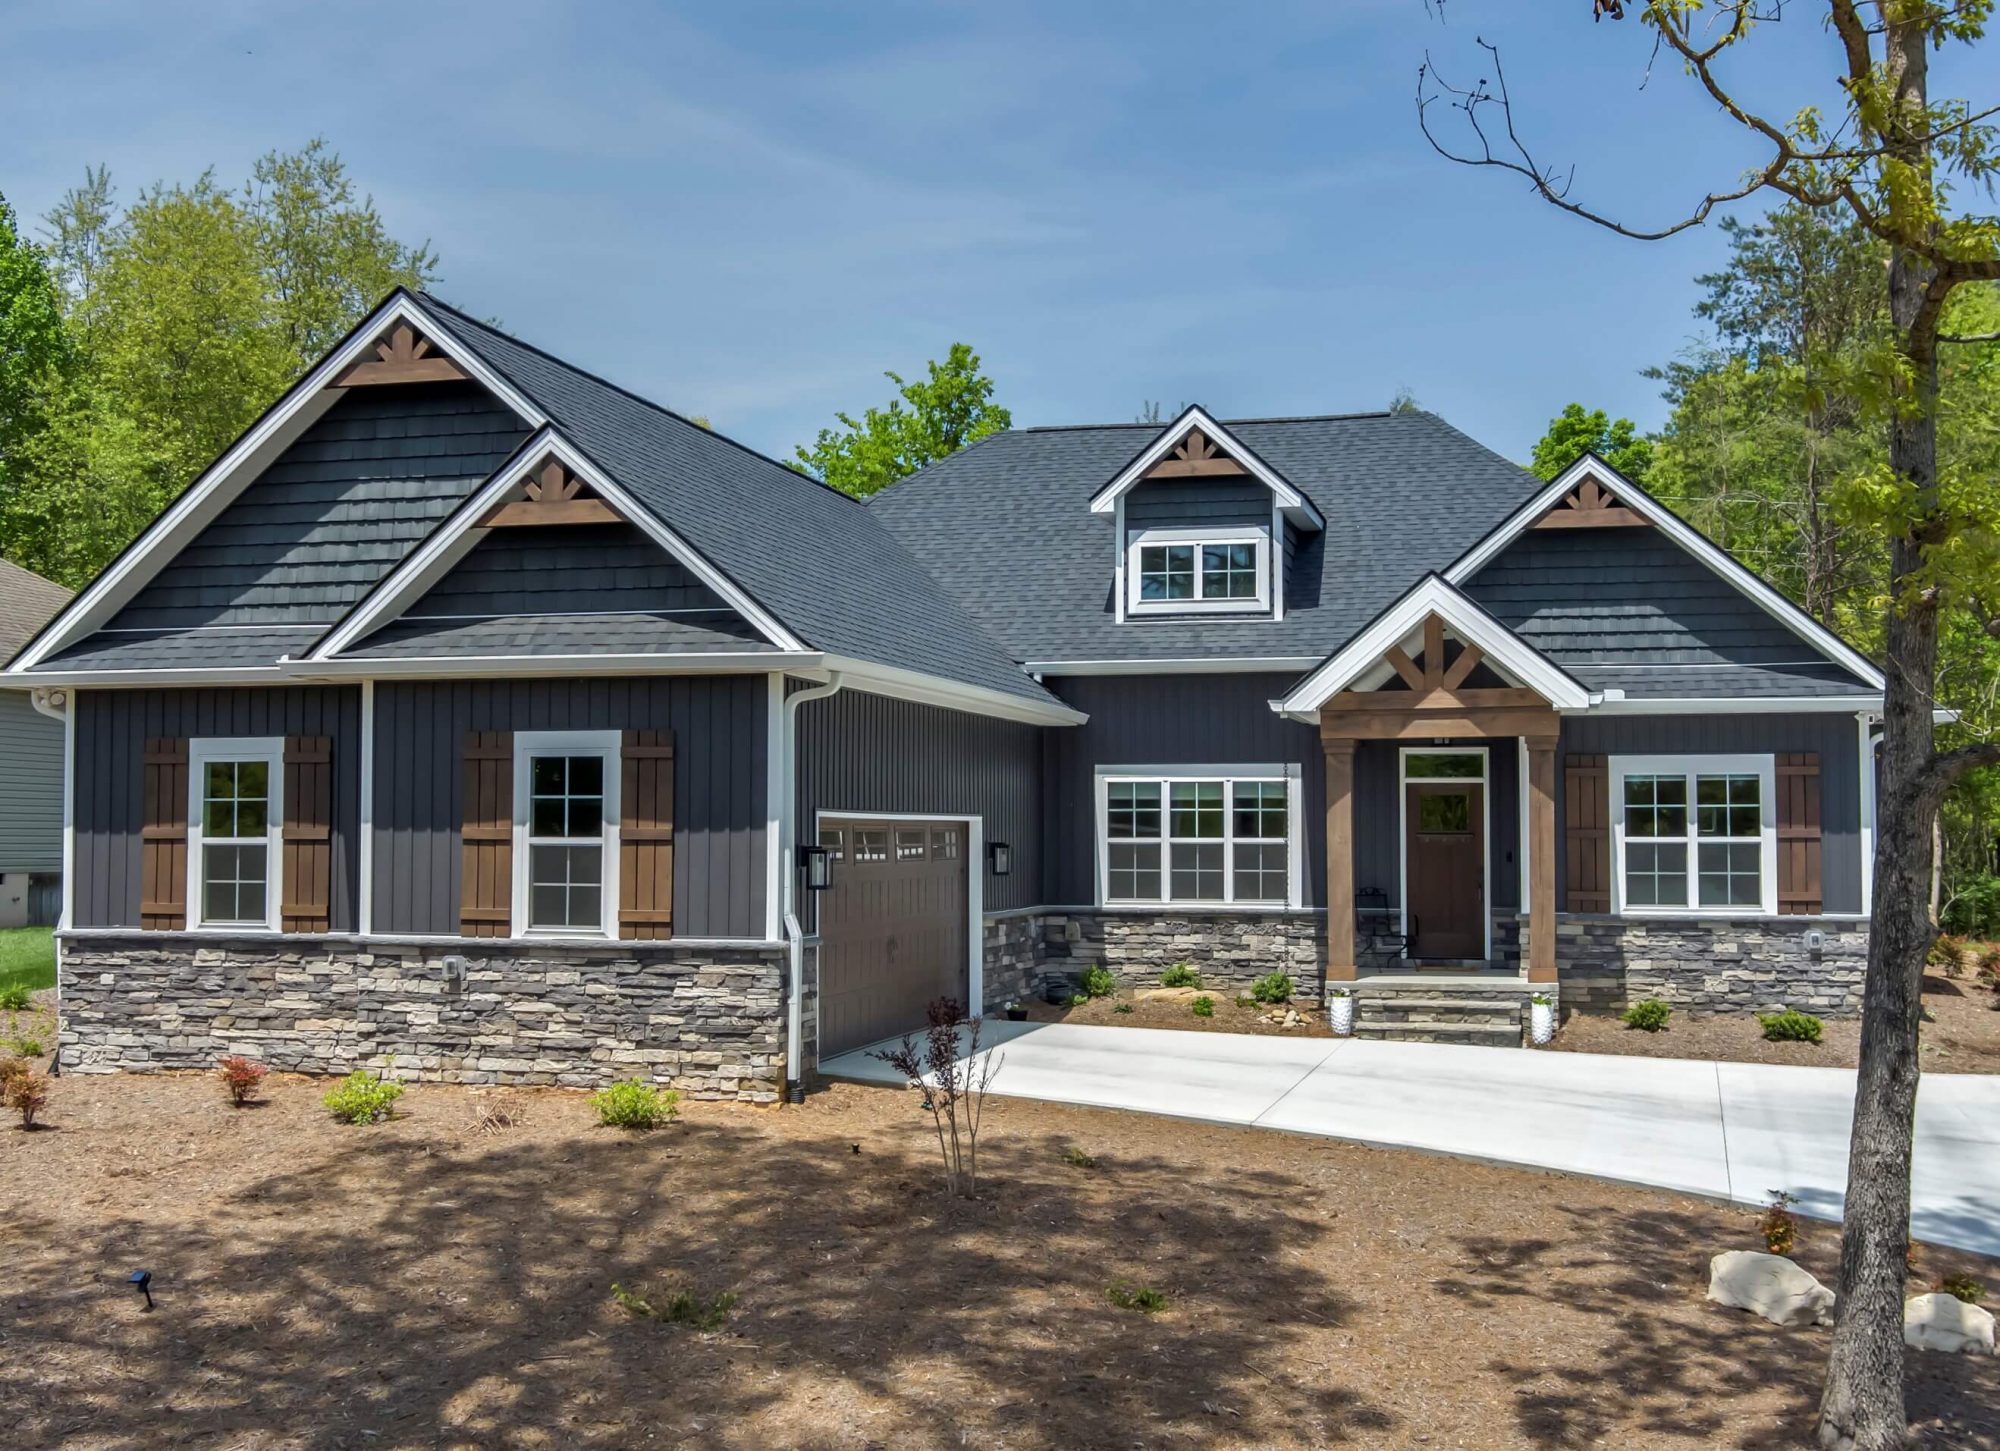 Precision Builders Inc. | Knoxville Custom Homes, Remodeling & Renovations